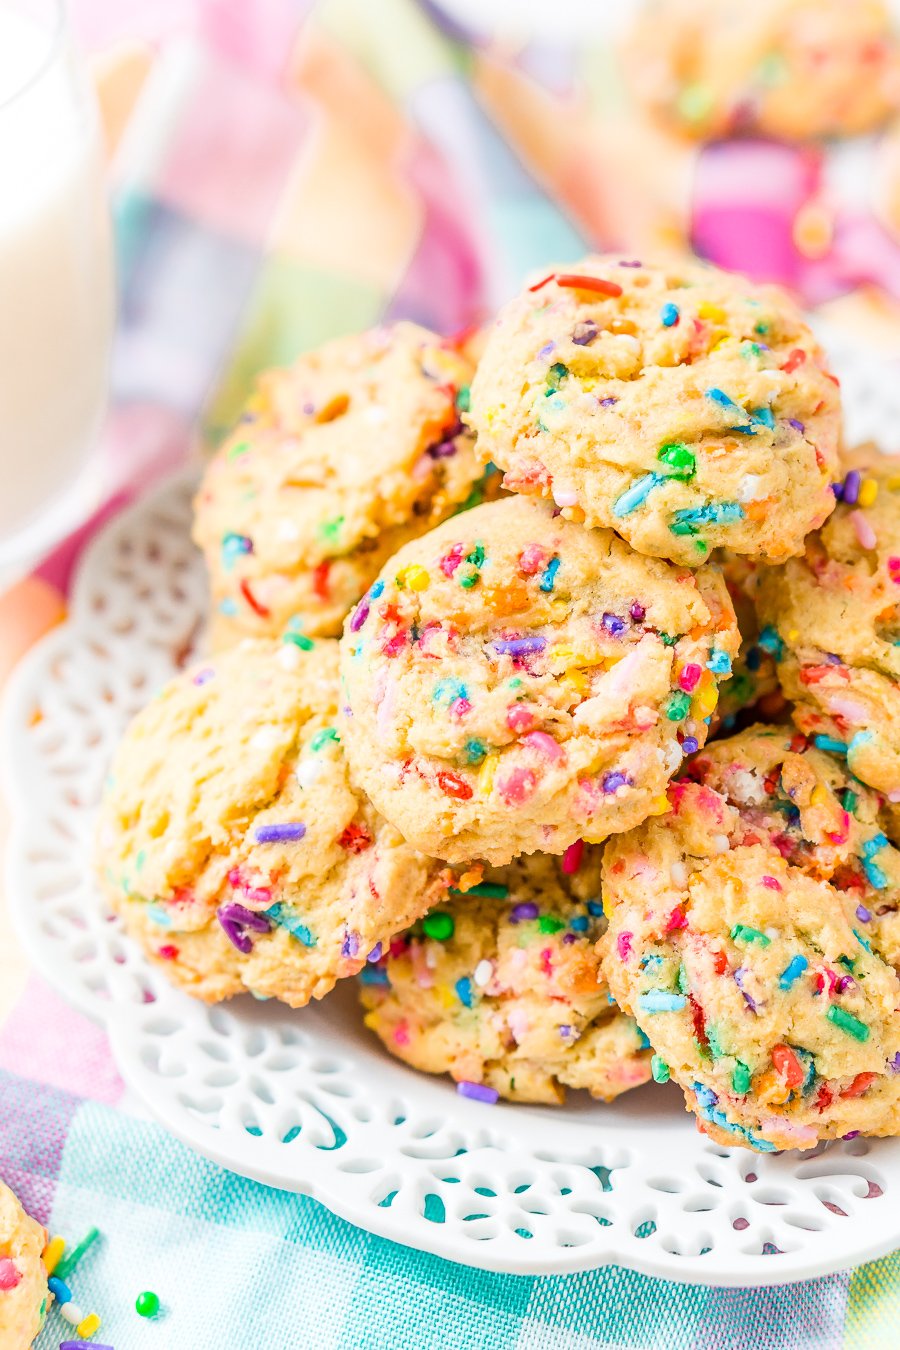 These Birthday Cake Pudding Cookies are sweet, chewy and loaded up with sprinkles. Tempting vanilla makes them the perfect alternative to cake, or you know, have both! I did!